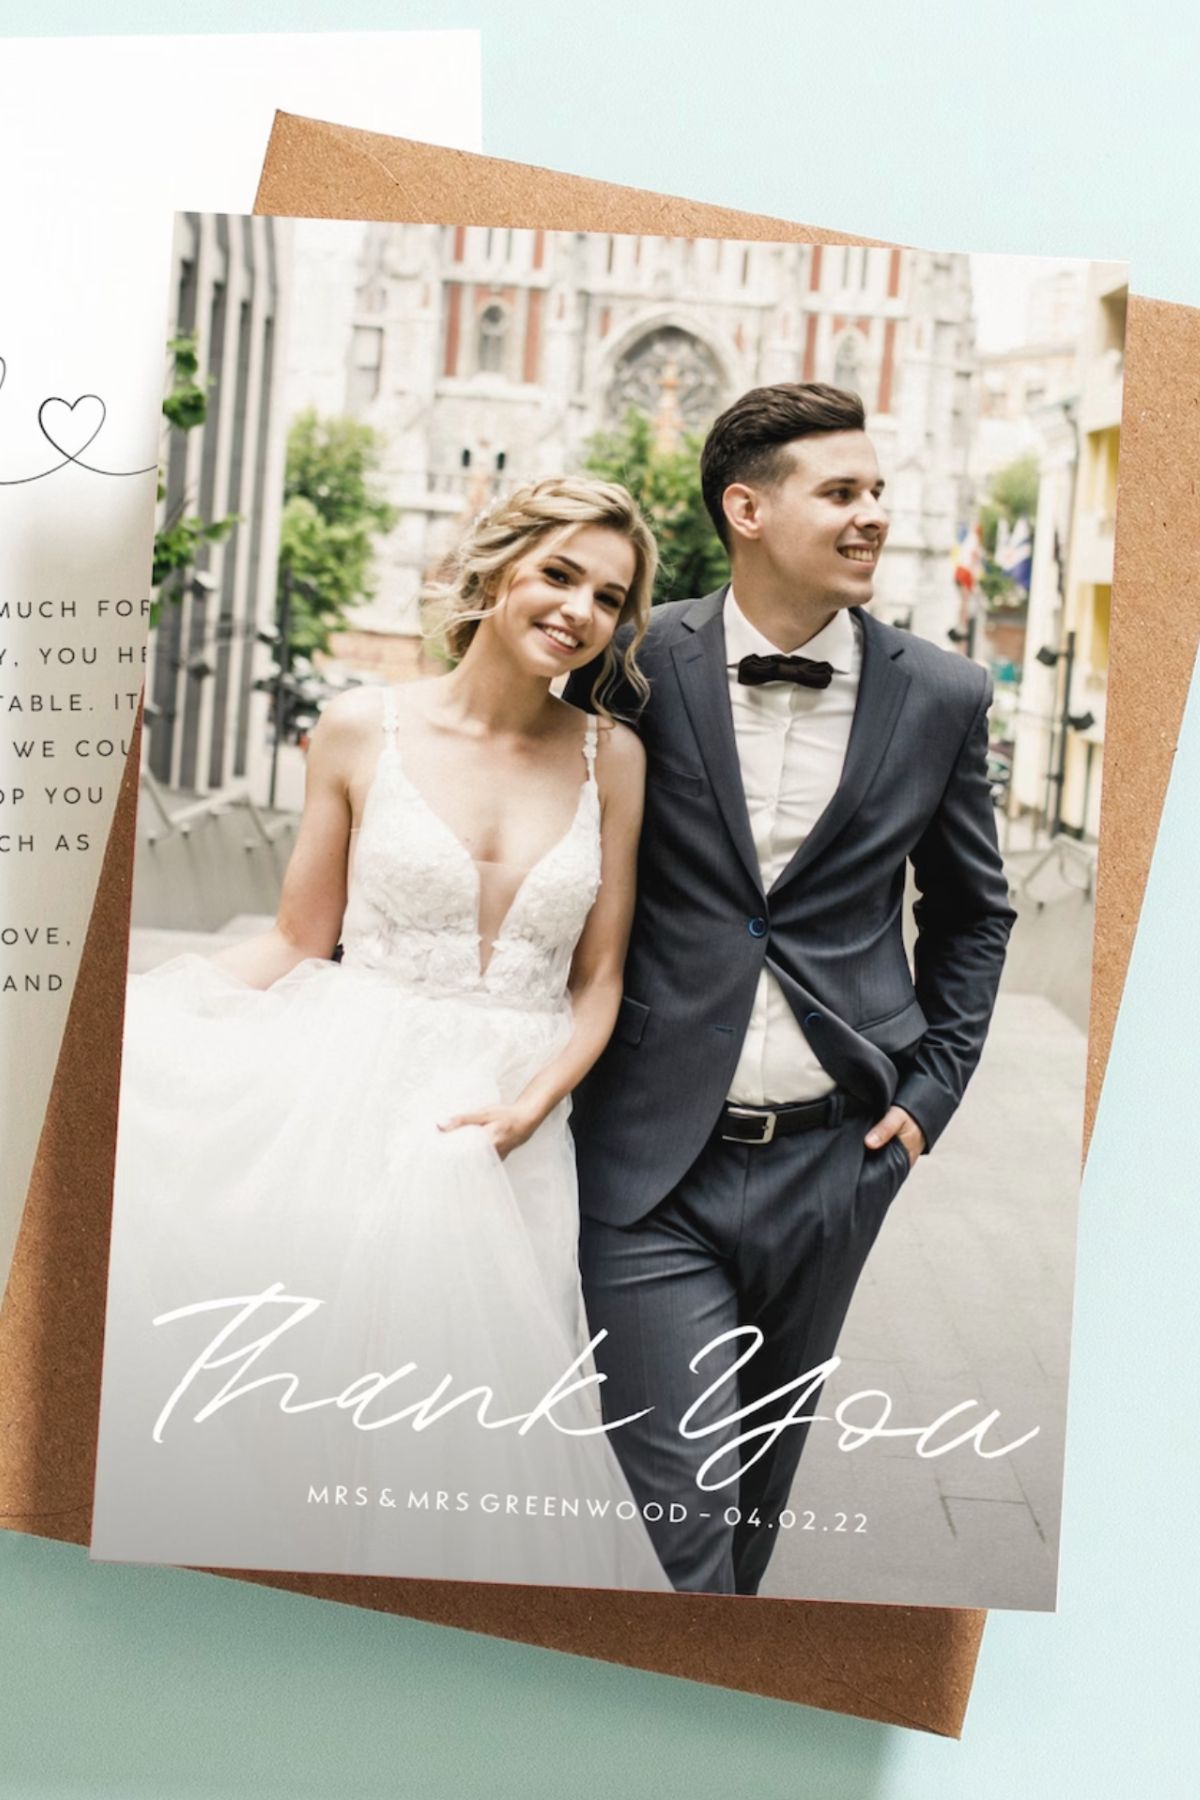 Organize Wedding Thank You Card List: How To